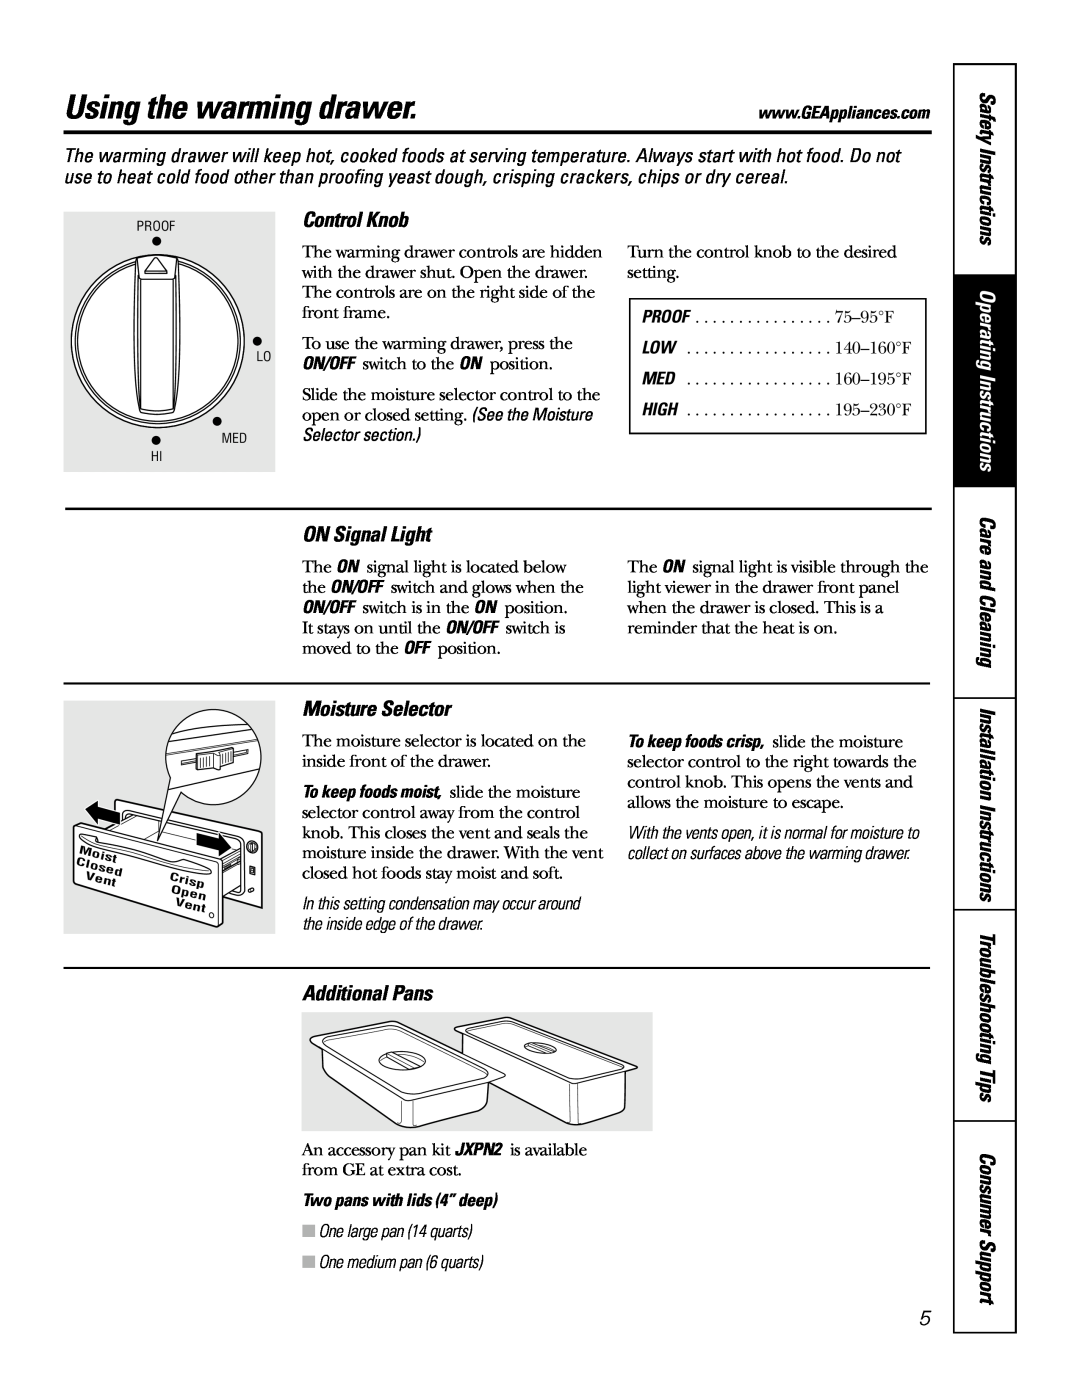 GE JTD915 Using the warming drawer, Operating Instructions, ON Signal Light, Moisture Selector, Installation Instructions 